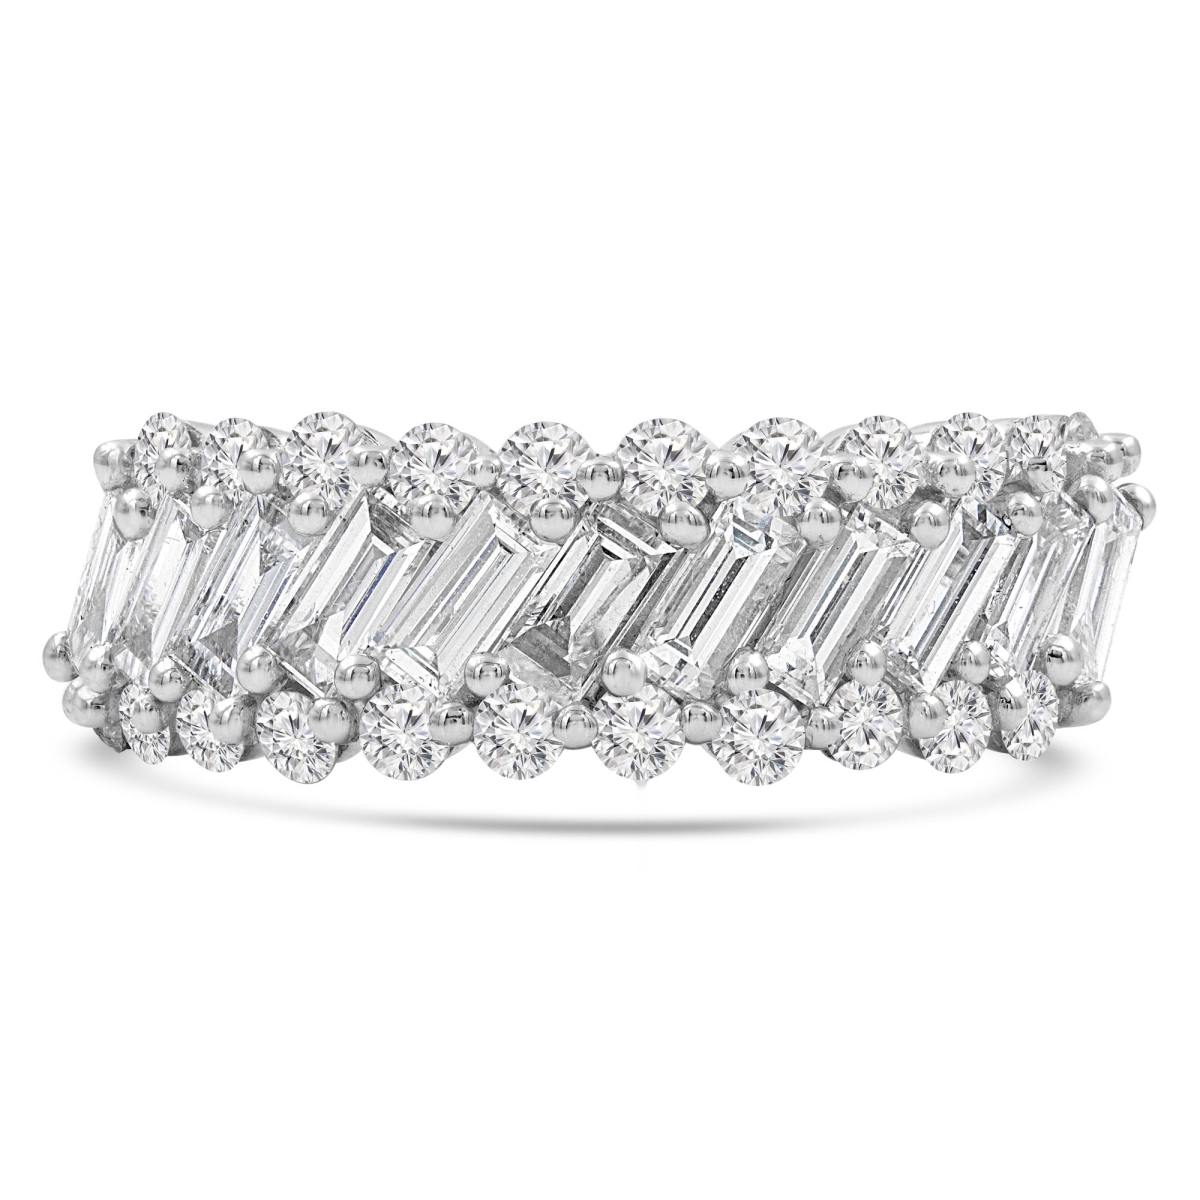 Picture of Majesty Diamonds MD210236-P 1.6 CTW Baguette Diamond Three-Row Cocktail Anniversary Band Ring in 18K White Gold